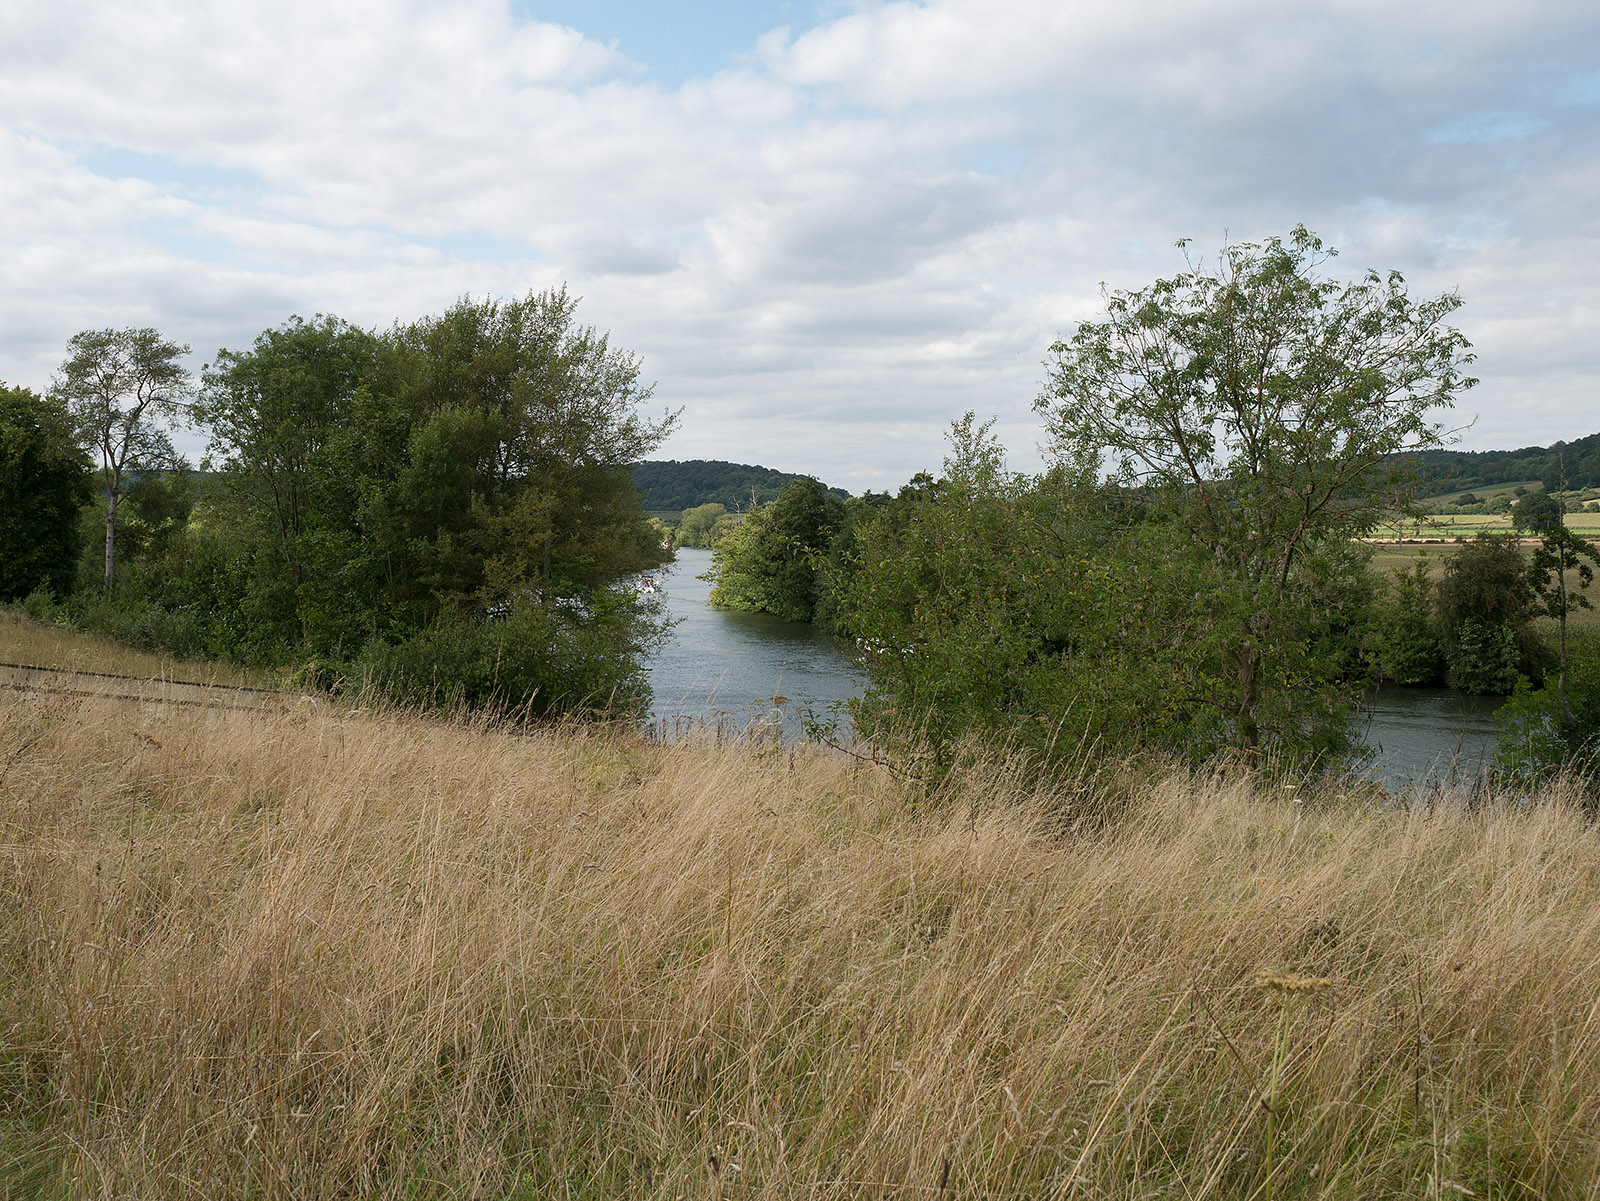 Looking down to the river from the ridgeway walk at Culham Court